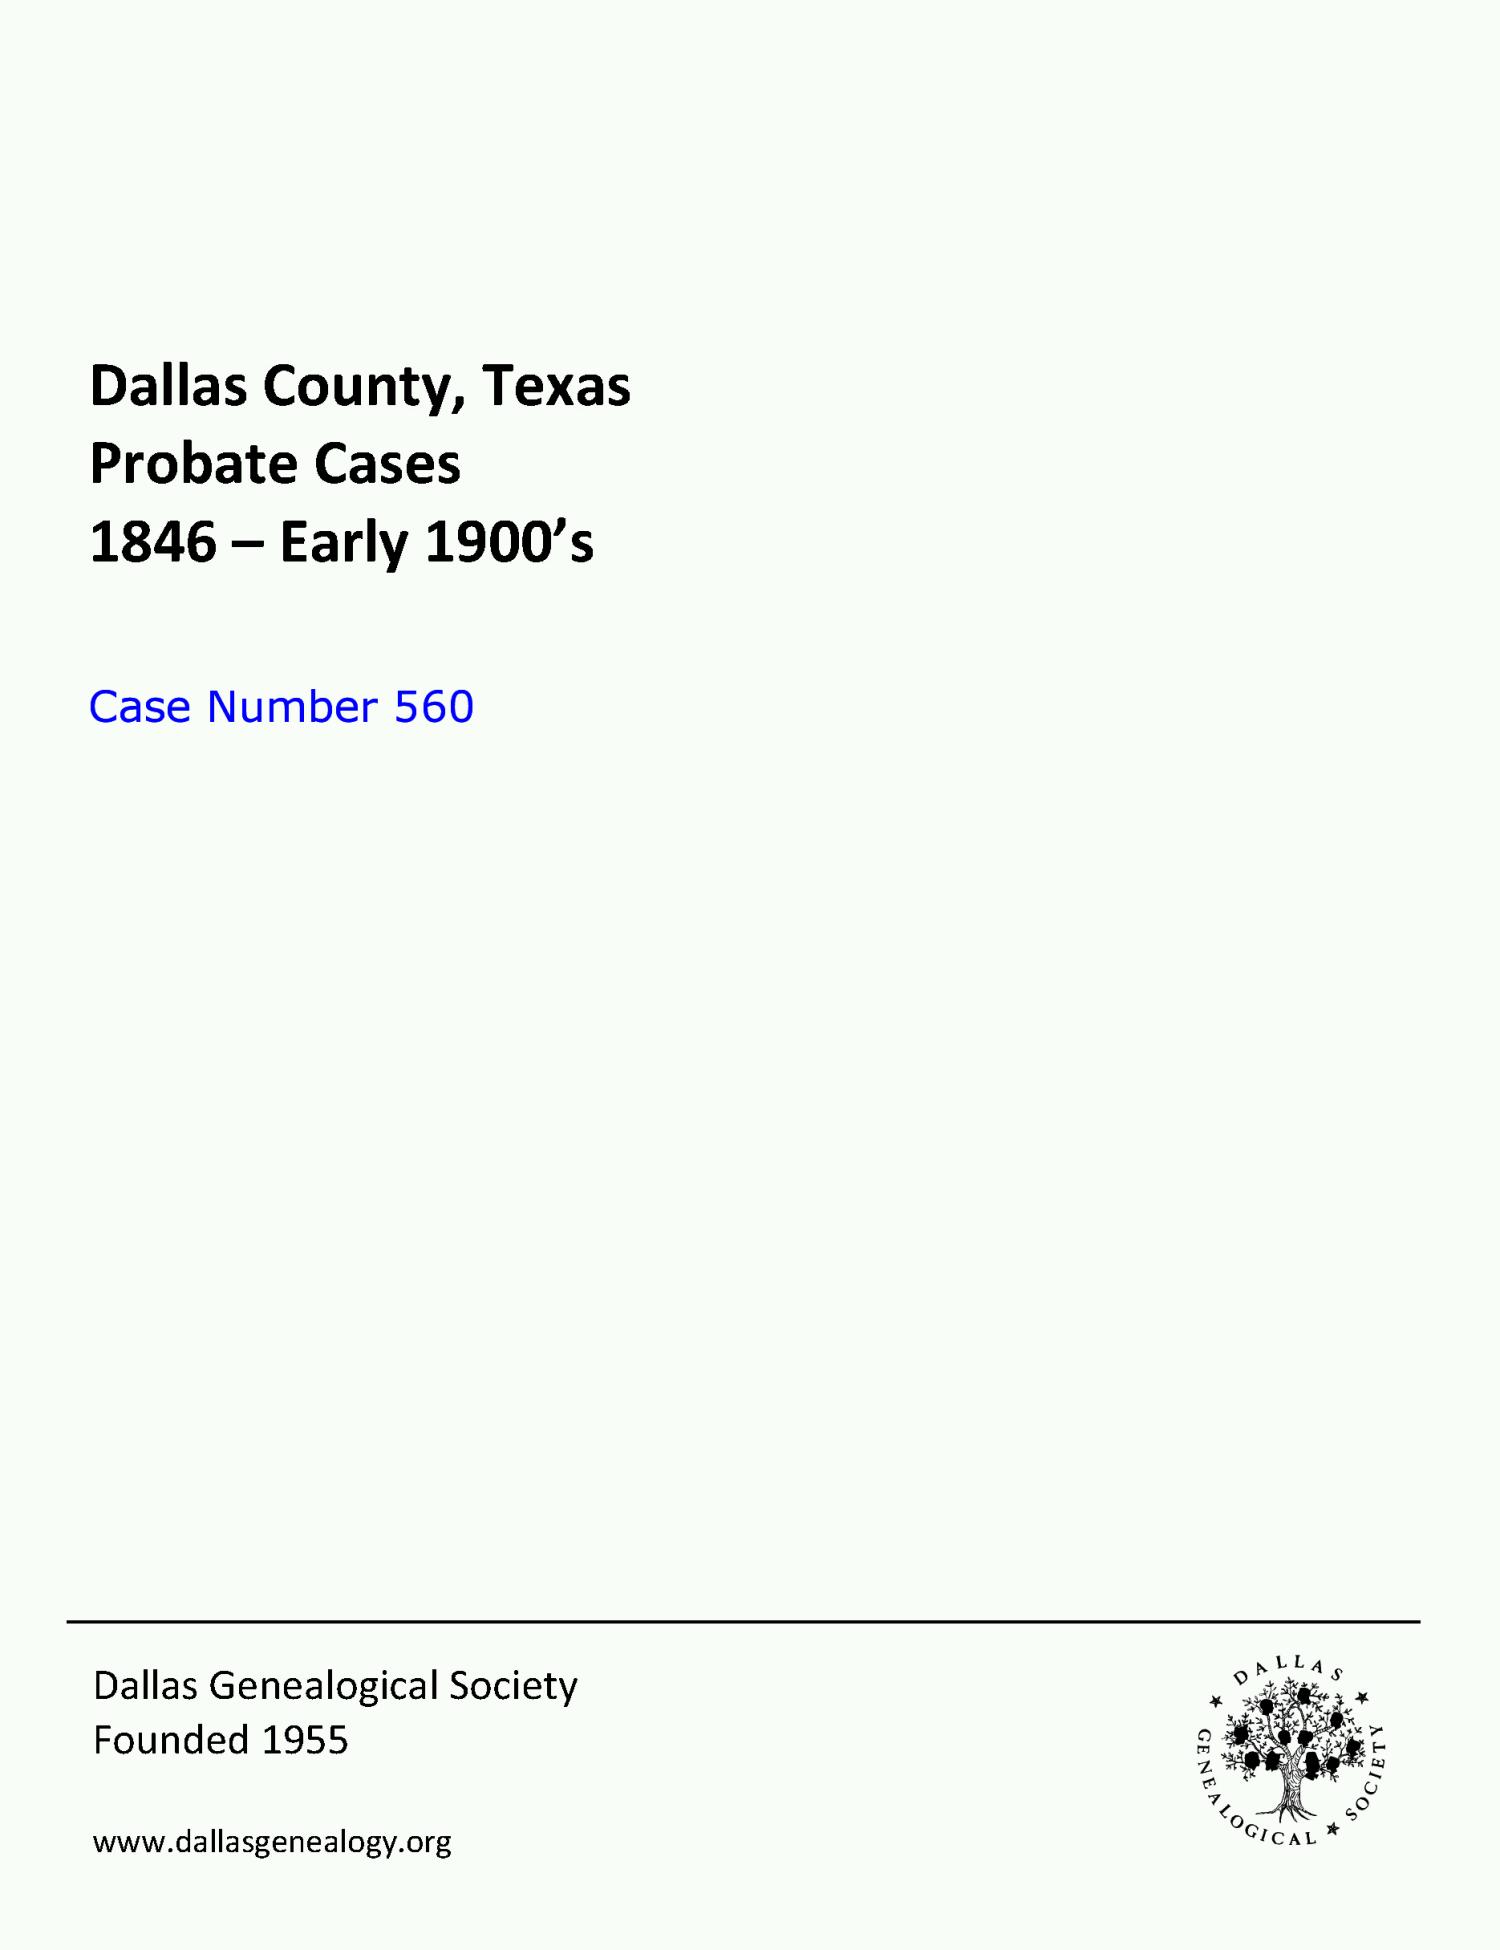 Dallas County Probate Case 560: Richards, Rozella D. (Minor)
                                                
                                                    [Sequence #]: 1 of 10
                                                